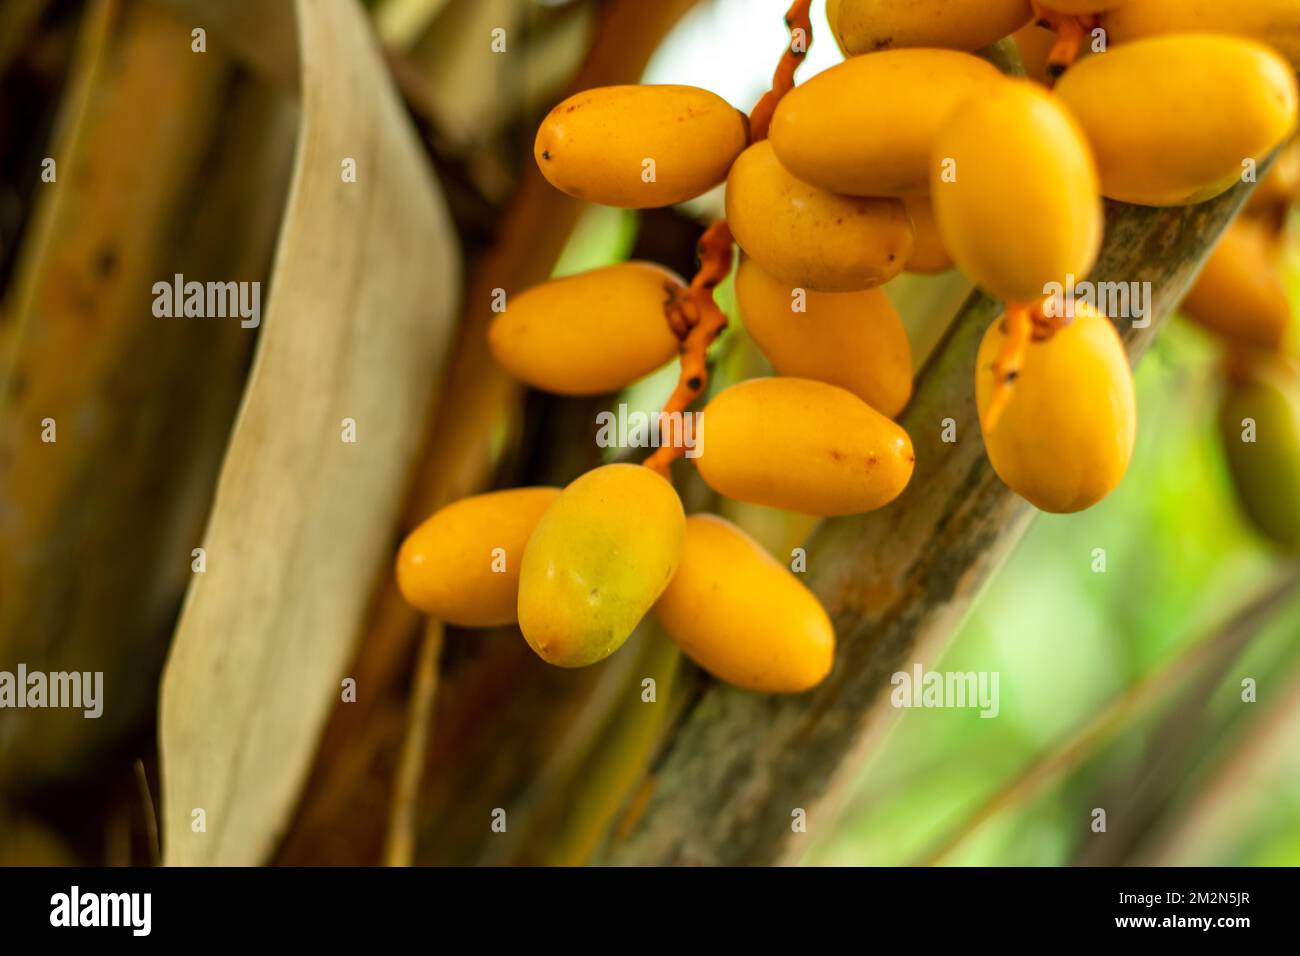 Dates are the delicious fruit grown from the date palm Phoenix dactylifera Date palms are native to the Persian Gulf area of the Middle East. Dates ar Stock Photo